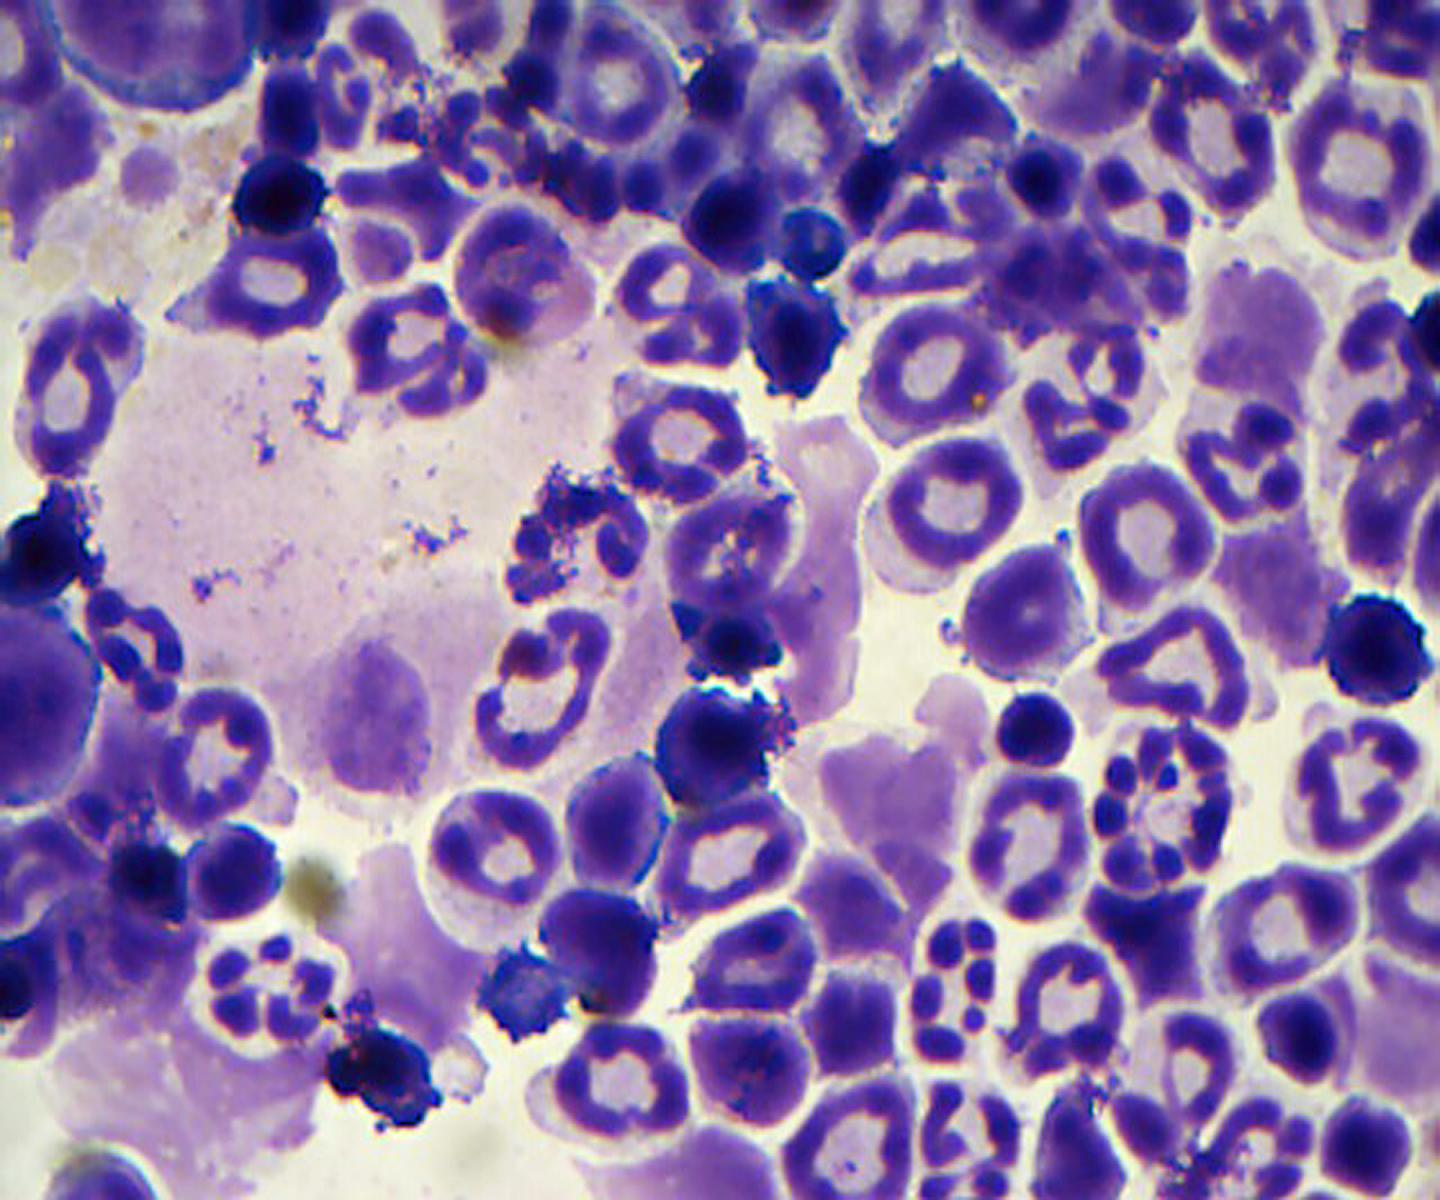 This microscopic image of myeloid cells taken from a genetic mouse model shows signs of the blood disease MDS (myelodysplastic syndromes), which can lead to leukemia. Instead of the normal appearance of myeloid blood cells--a smooth, round, donut-shape with a single nucleus--cells with MDS are underdeveloped, have multiple nuclei or are hyper-segmented. Researchers report in the journal Cancer Discovery identifying a gene called HIF1A that drives molecular processes leading to the diverse types of MDS disorders that affect people, opening the future possibility of developing new therapeutics for MDS. [source: Cincinnati Children's]